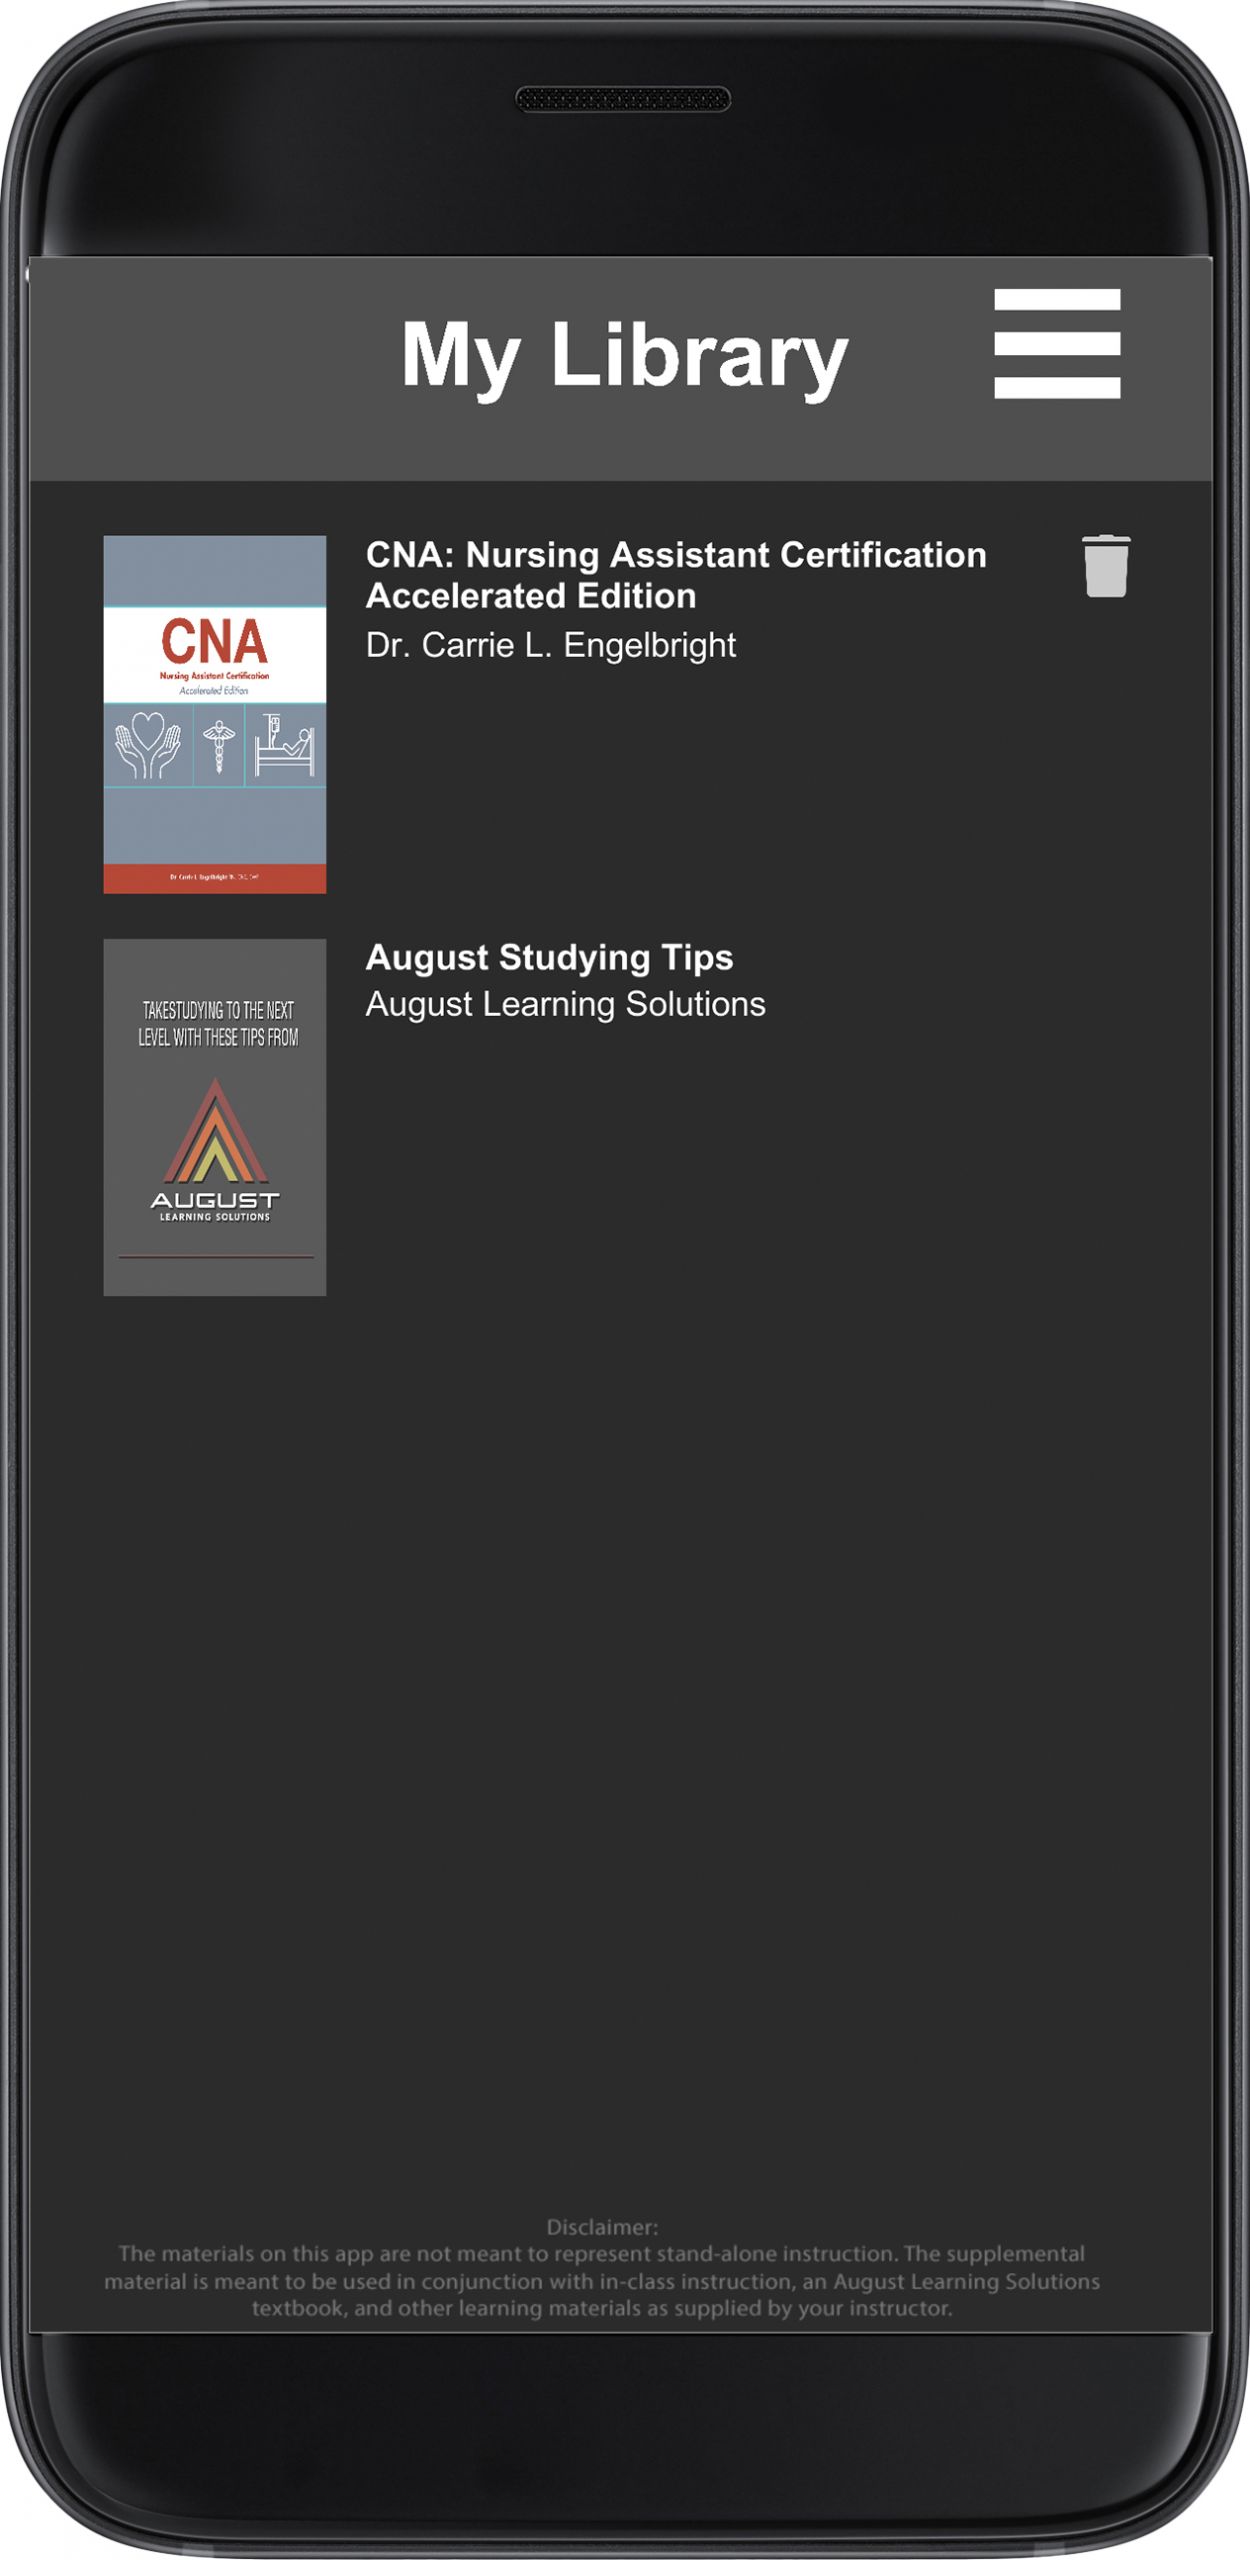 August Learning Solutions app image